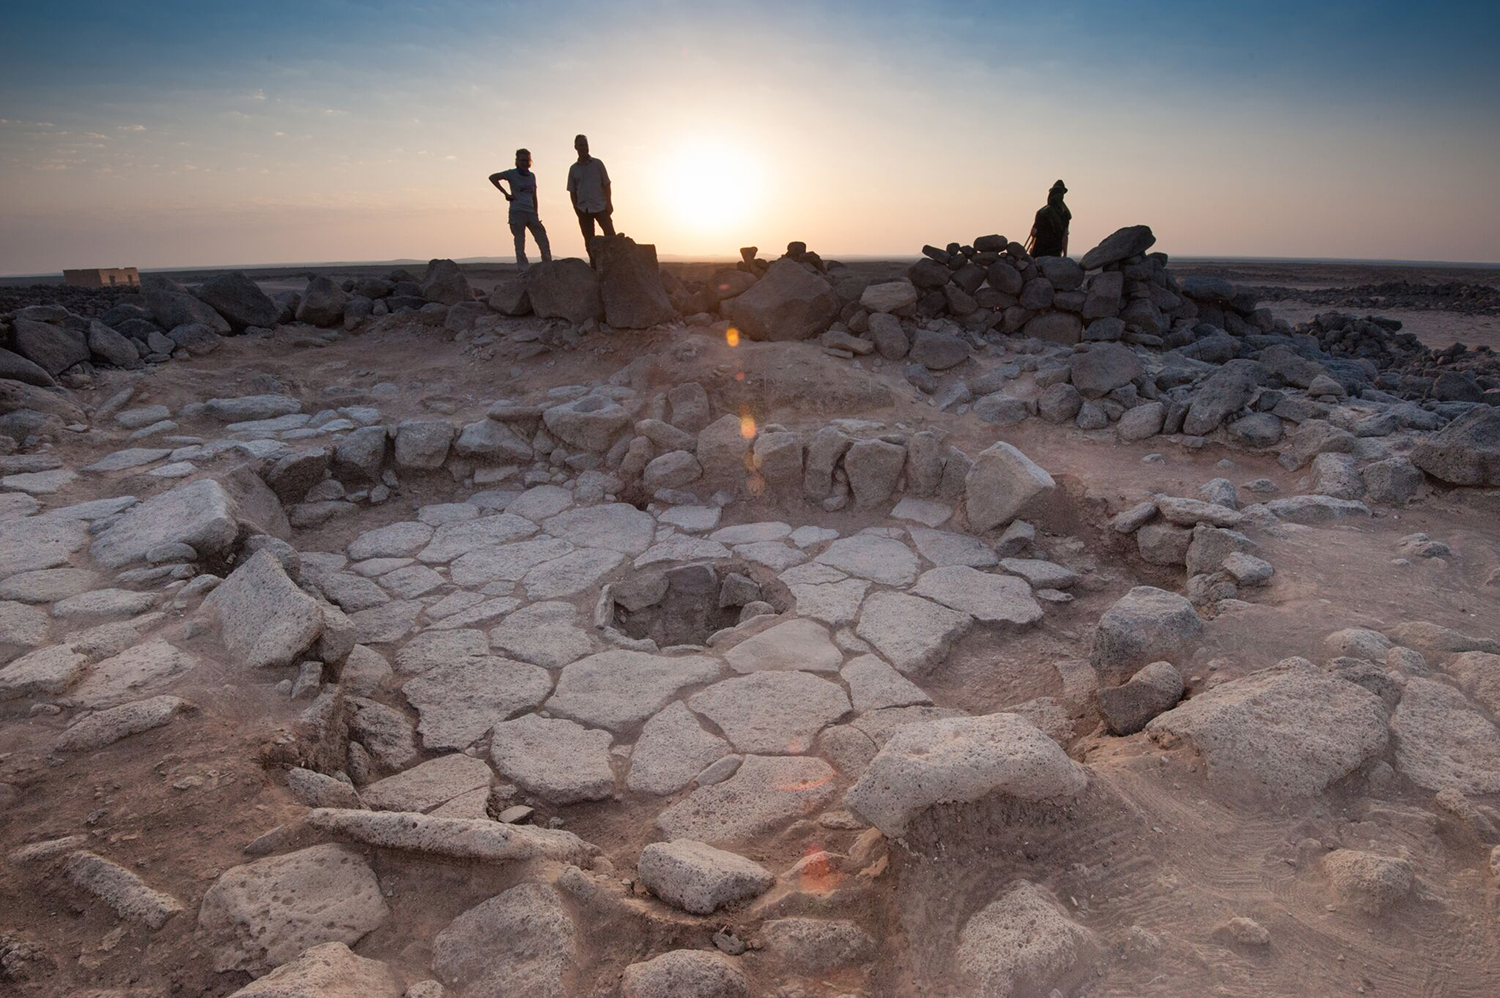 Burnt bread shows that our ancestors were baking 4,000 years before agriculture